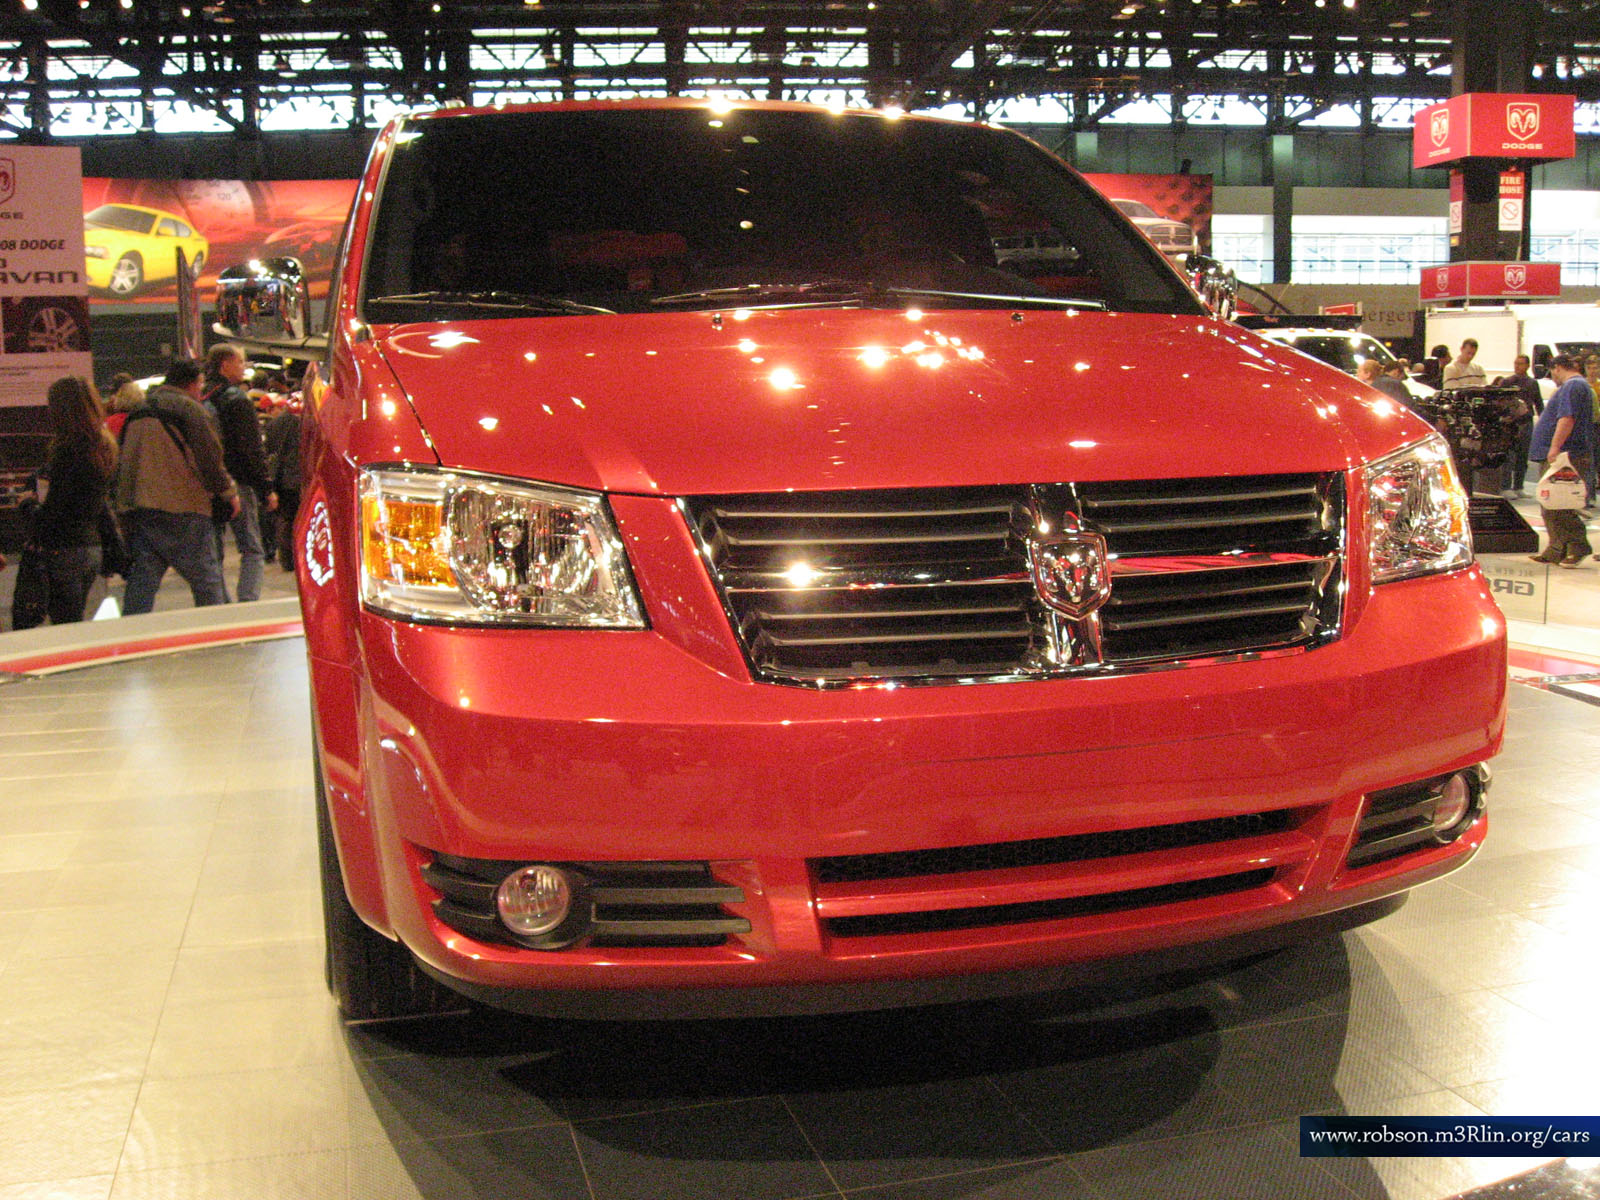 Finding, researching, and buying a used Dodge Caravan SXT online doesn't